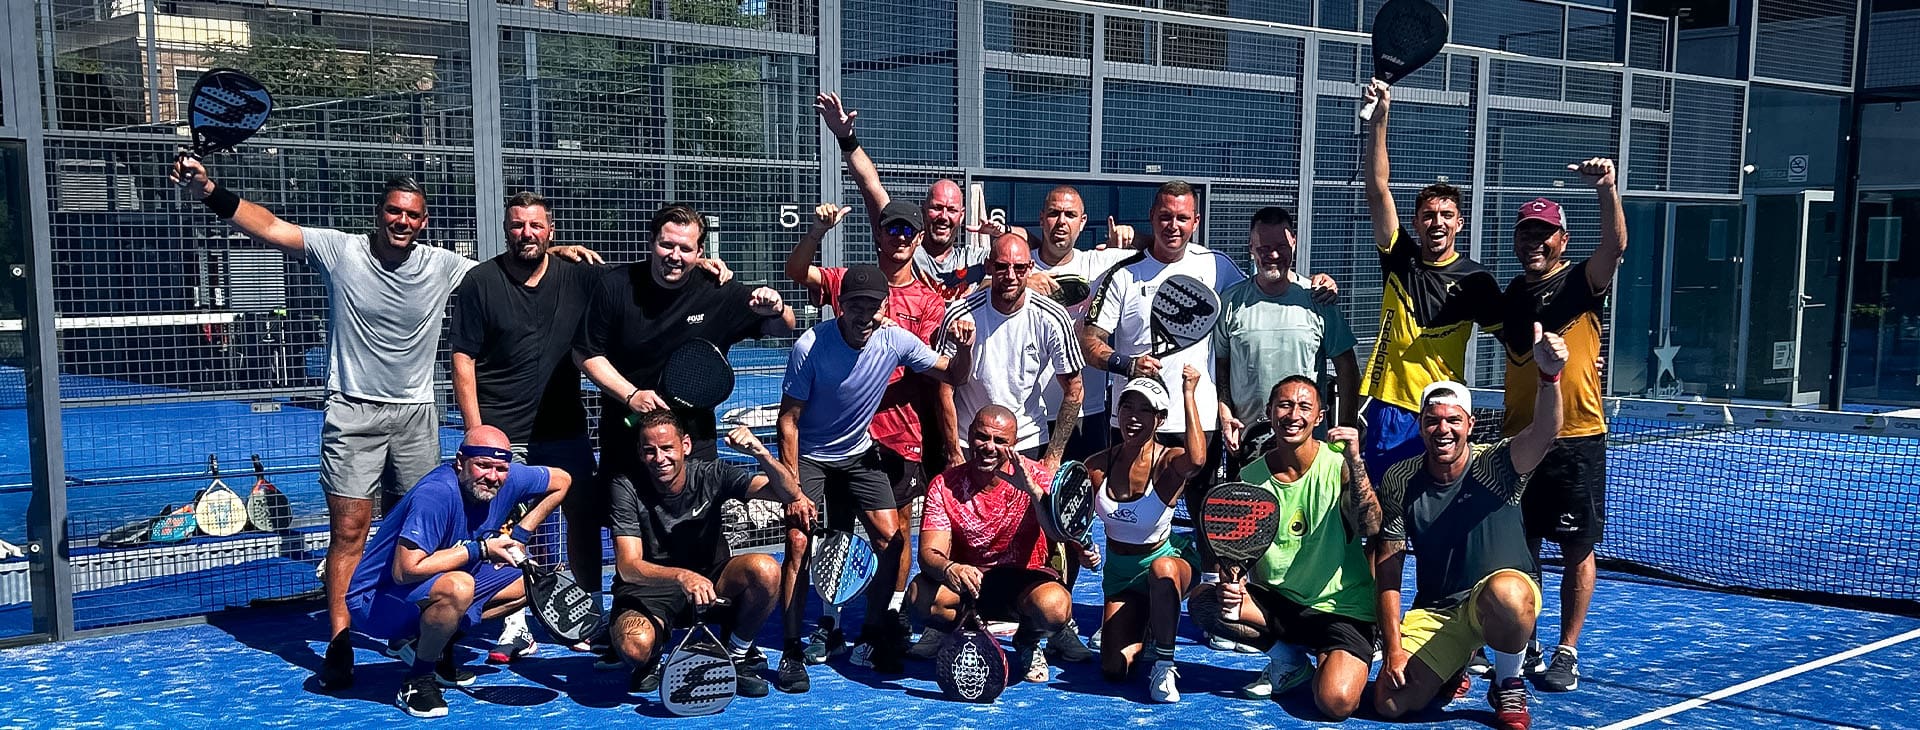 Padel Participants Overview Padel Academy, Camp, Training